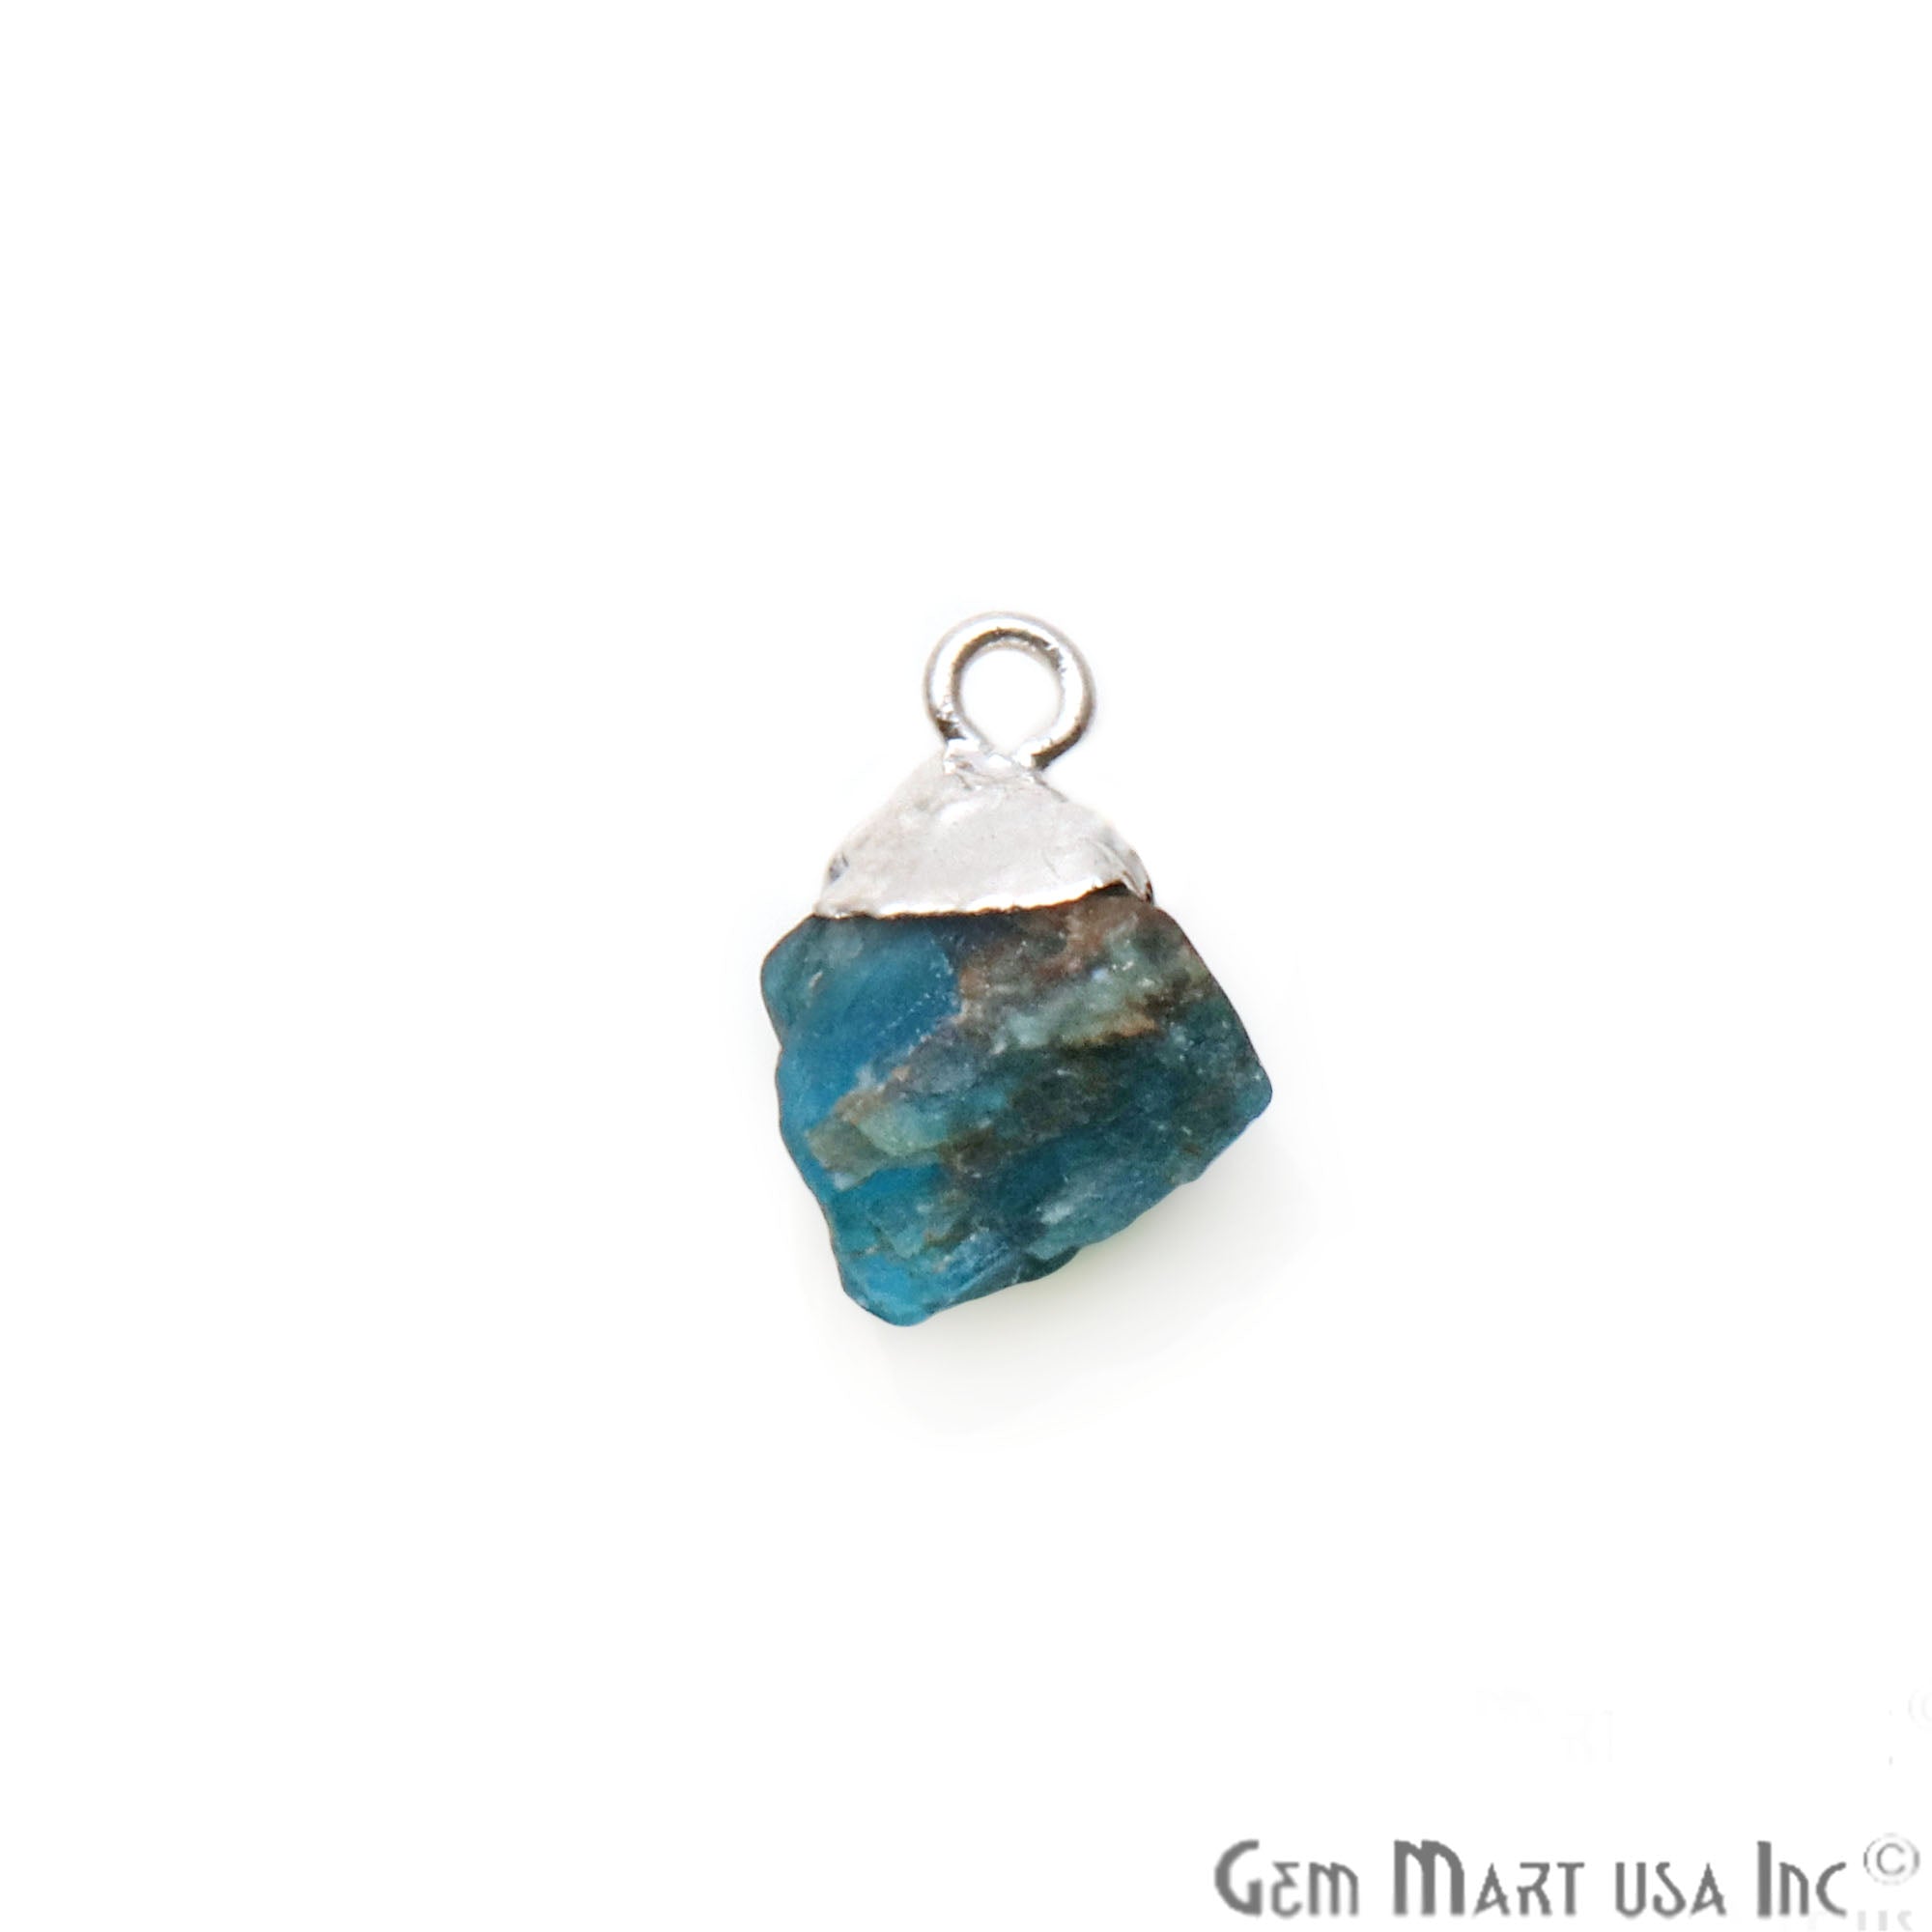 Rough Neon Apatite Organic 15x10mm Silver Electroplated Pendant Connector - GemMartUSA